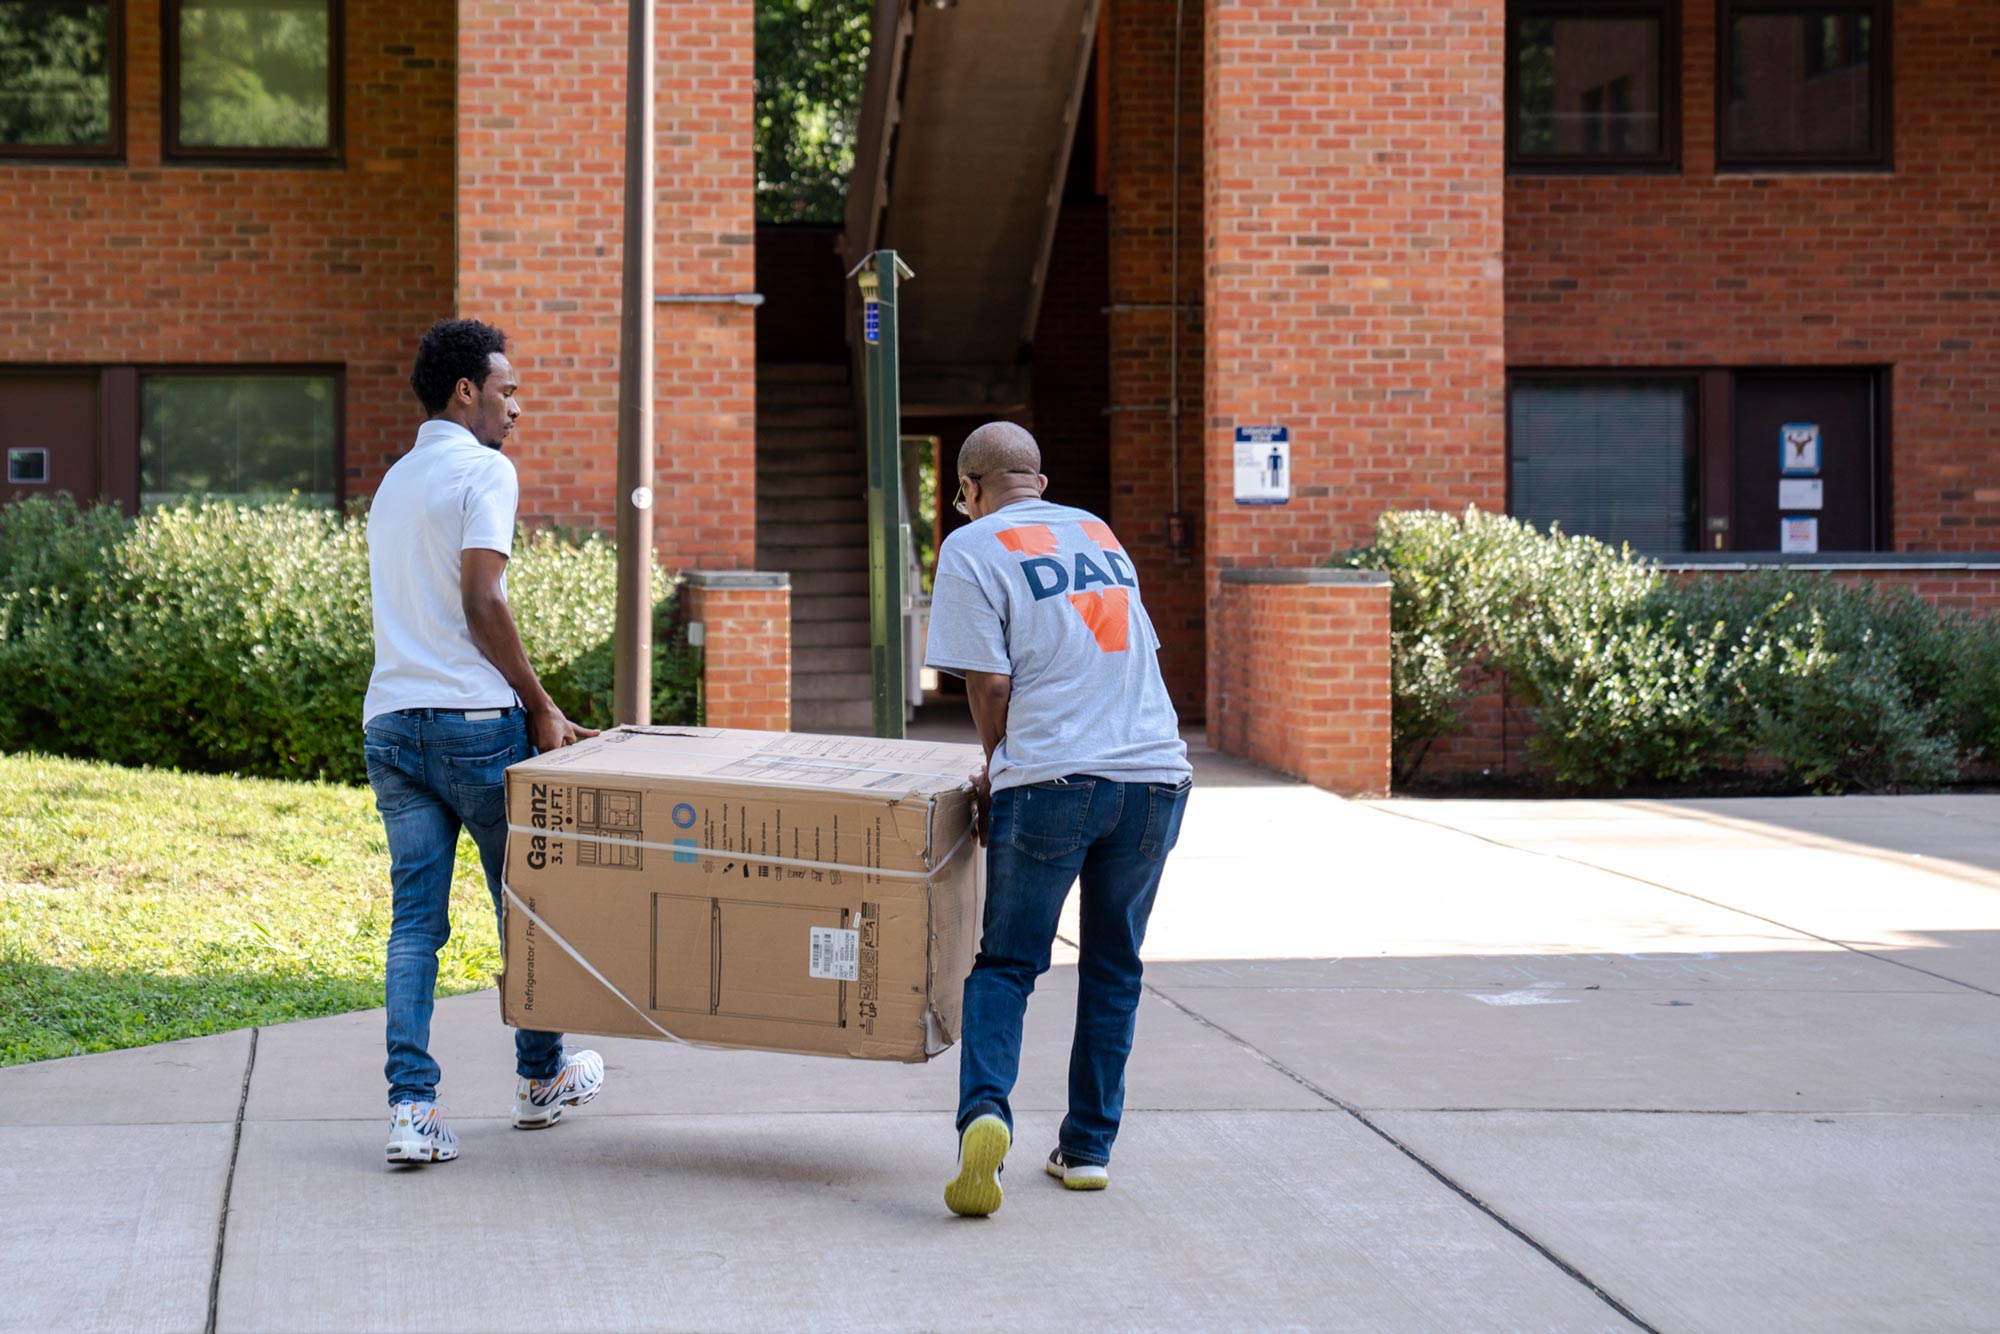 A man in a Virginia Dad t-shirt helps his son move a large box into a dorm